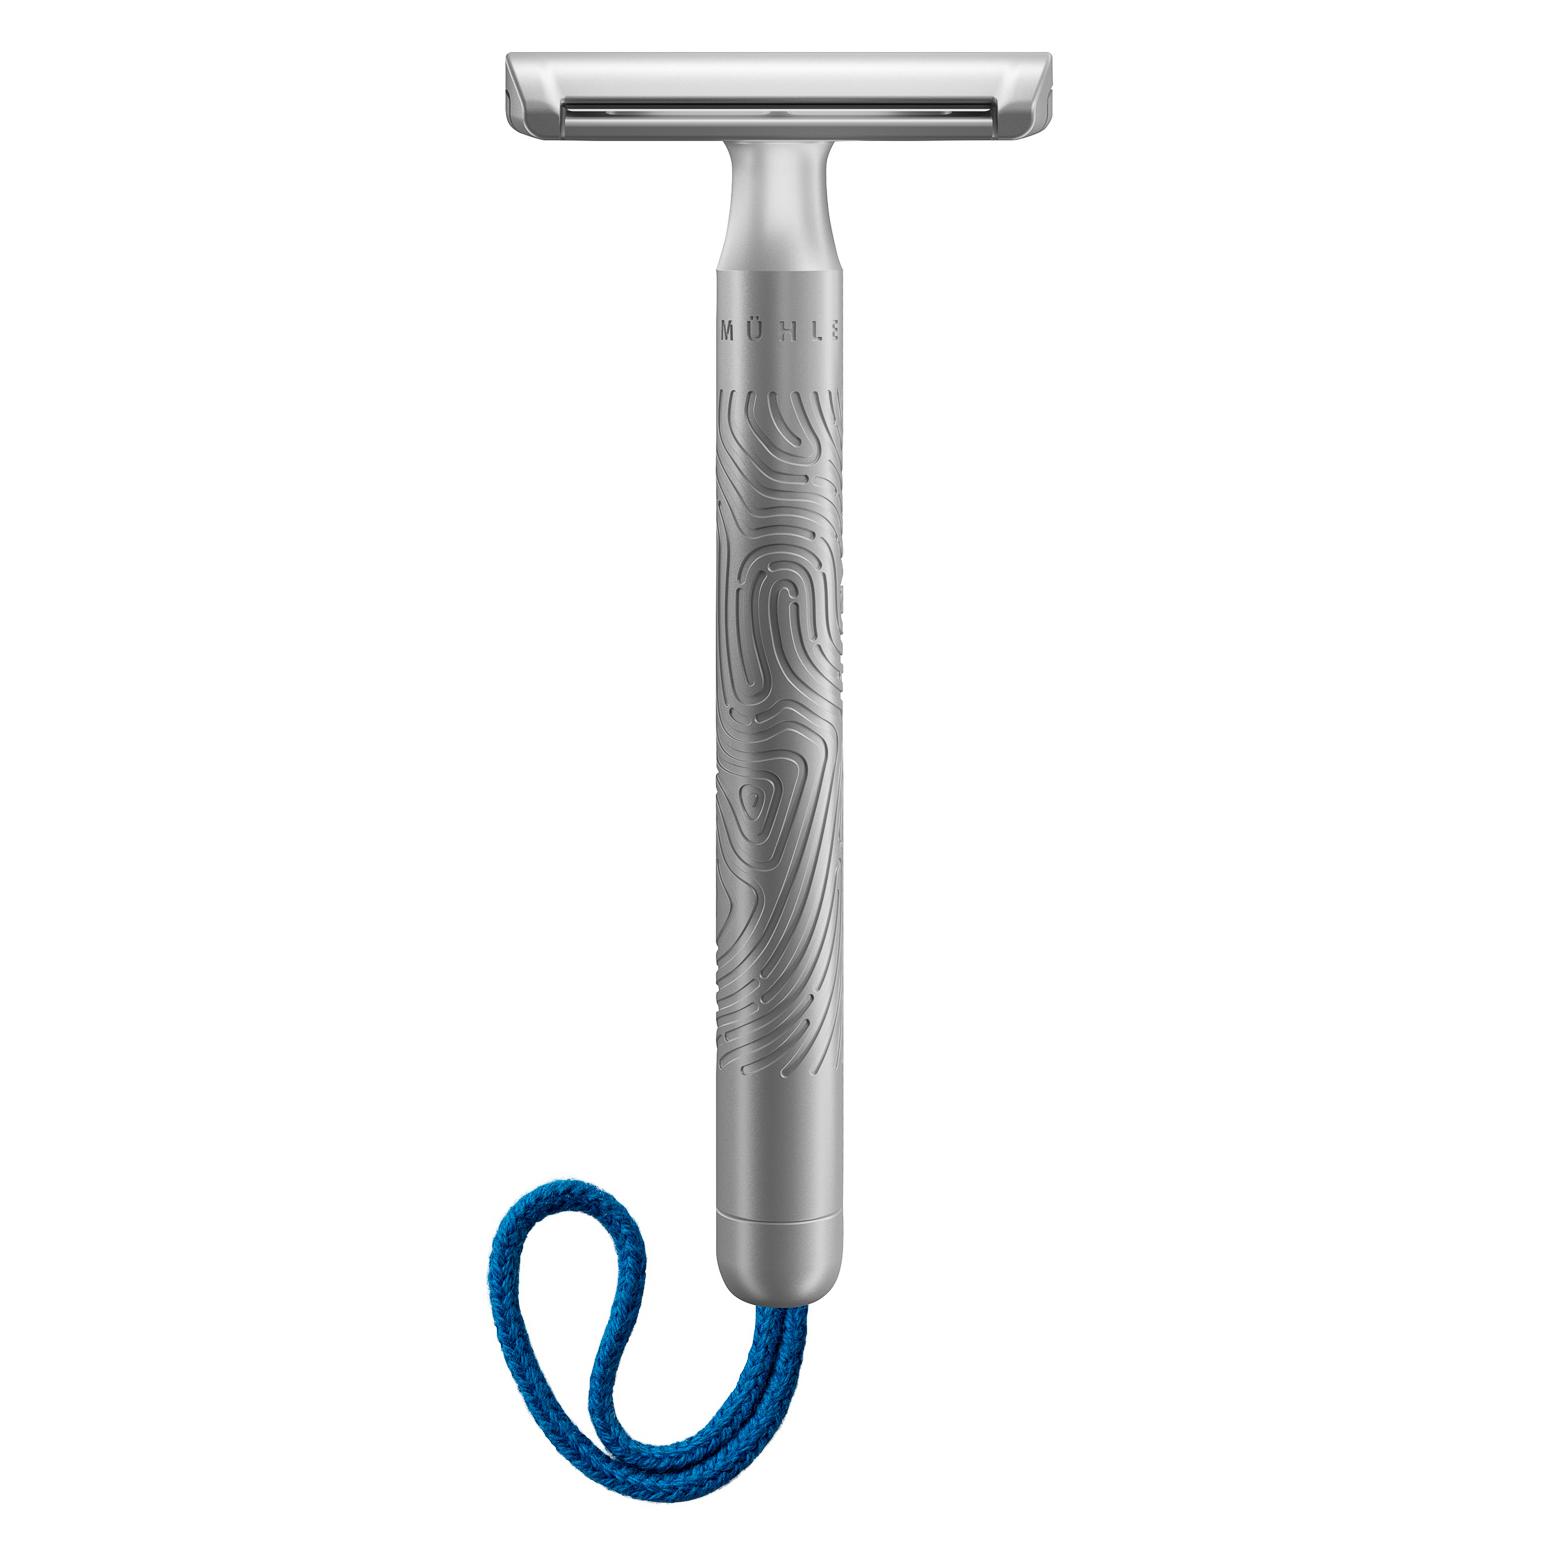 MUHLE Companion safety razor with blue colour cord